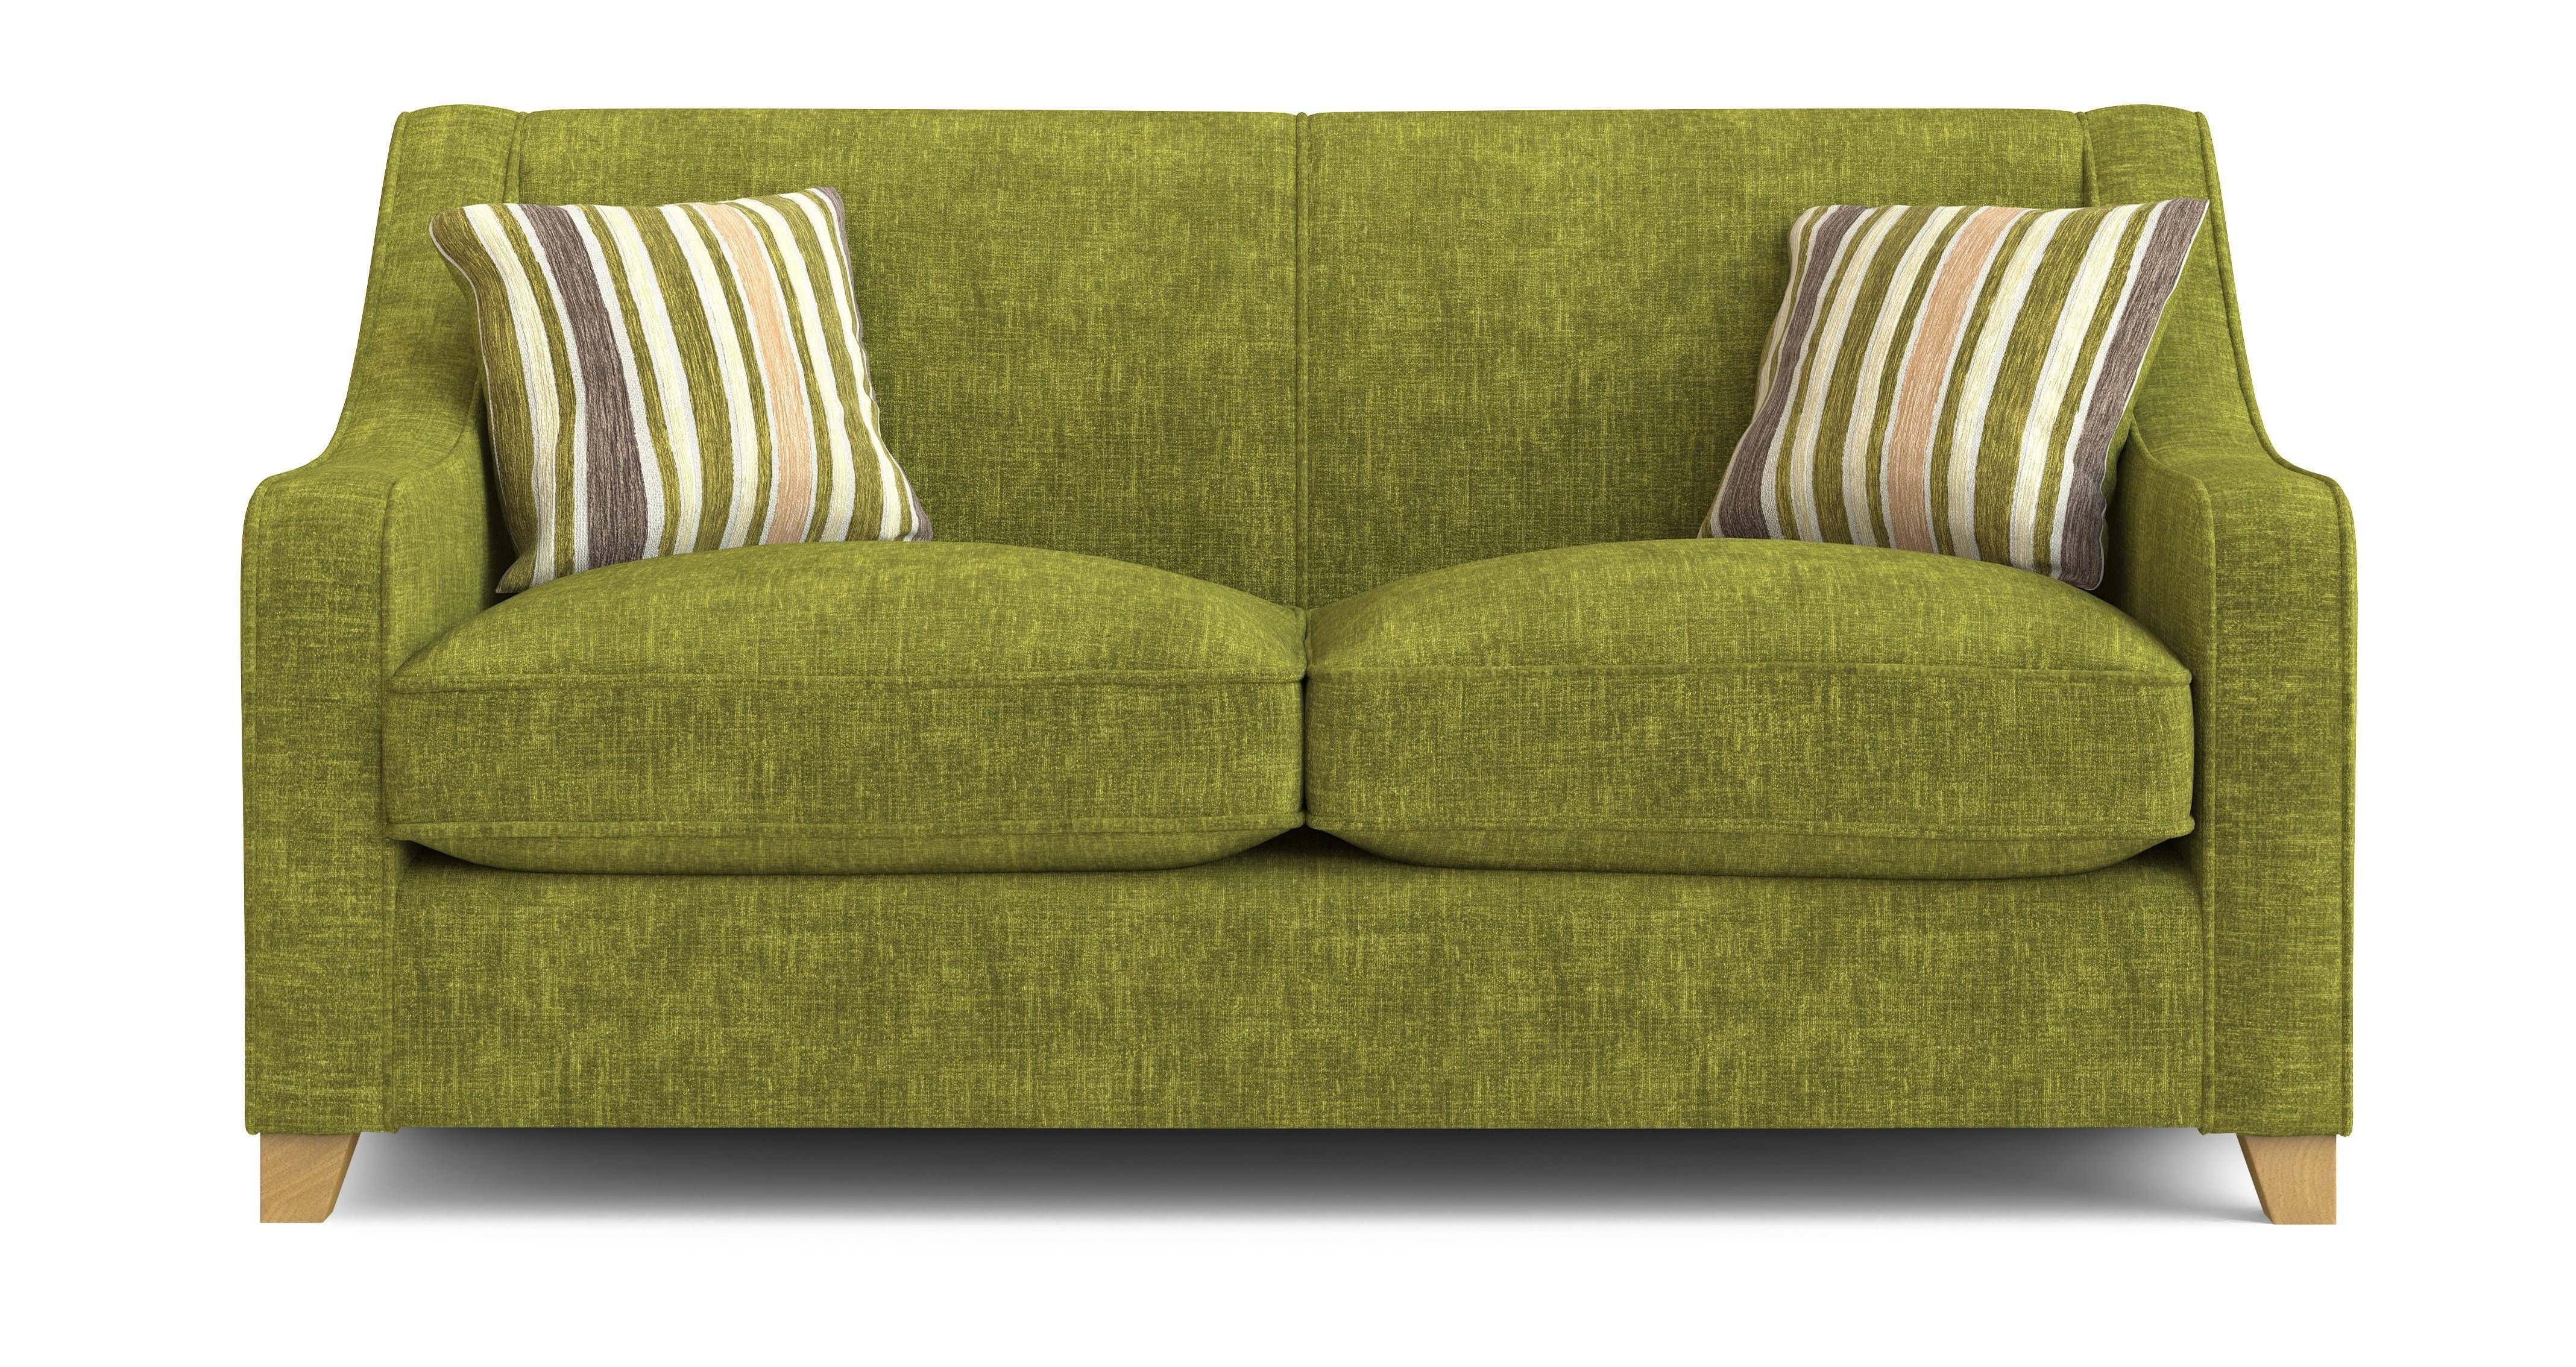 Small 2 Seater Sofa | Best Sofas Ideas – Sofascouch Pertaining To Small 2 Seater Sofas (View 3 of 30)